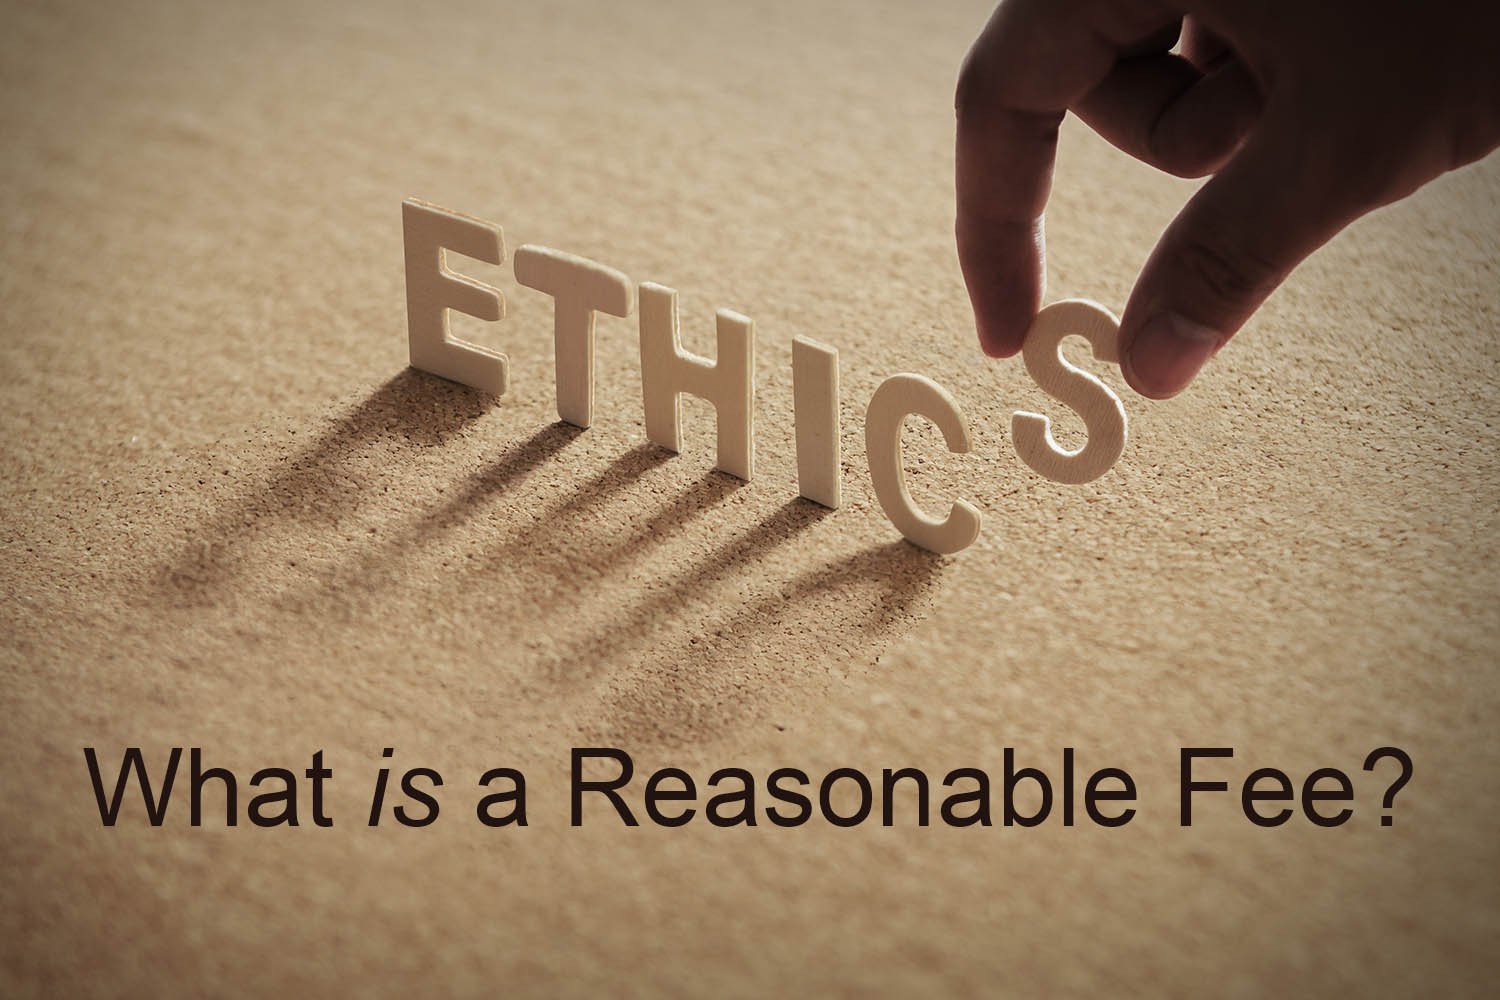 ethics - What is a Reasonable Fee